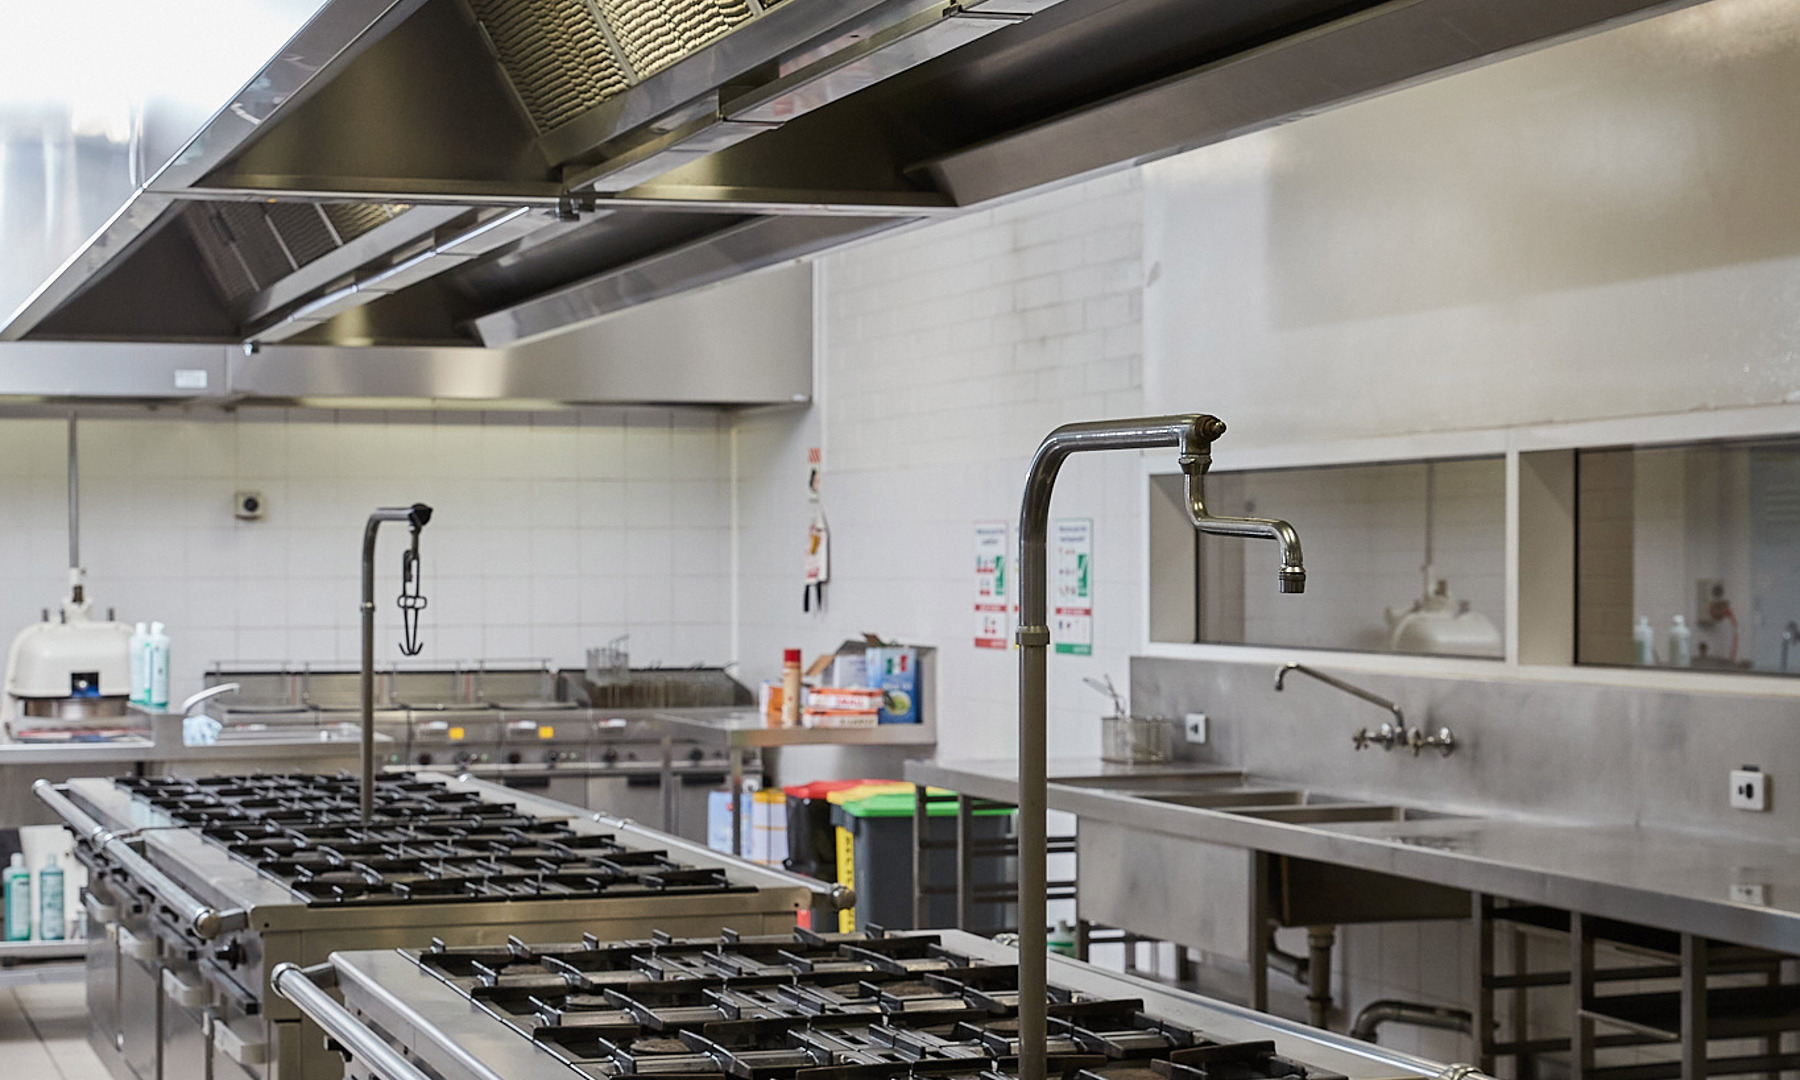 Kitchen facility at Melbourne Polytechnic Preston Campus, filled with an array of gas stoves.